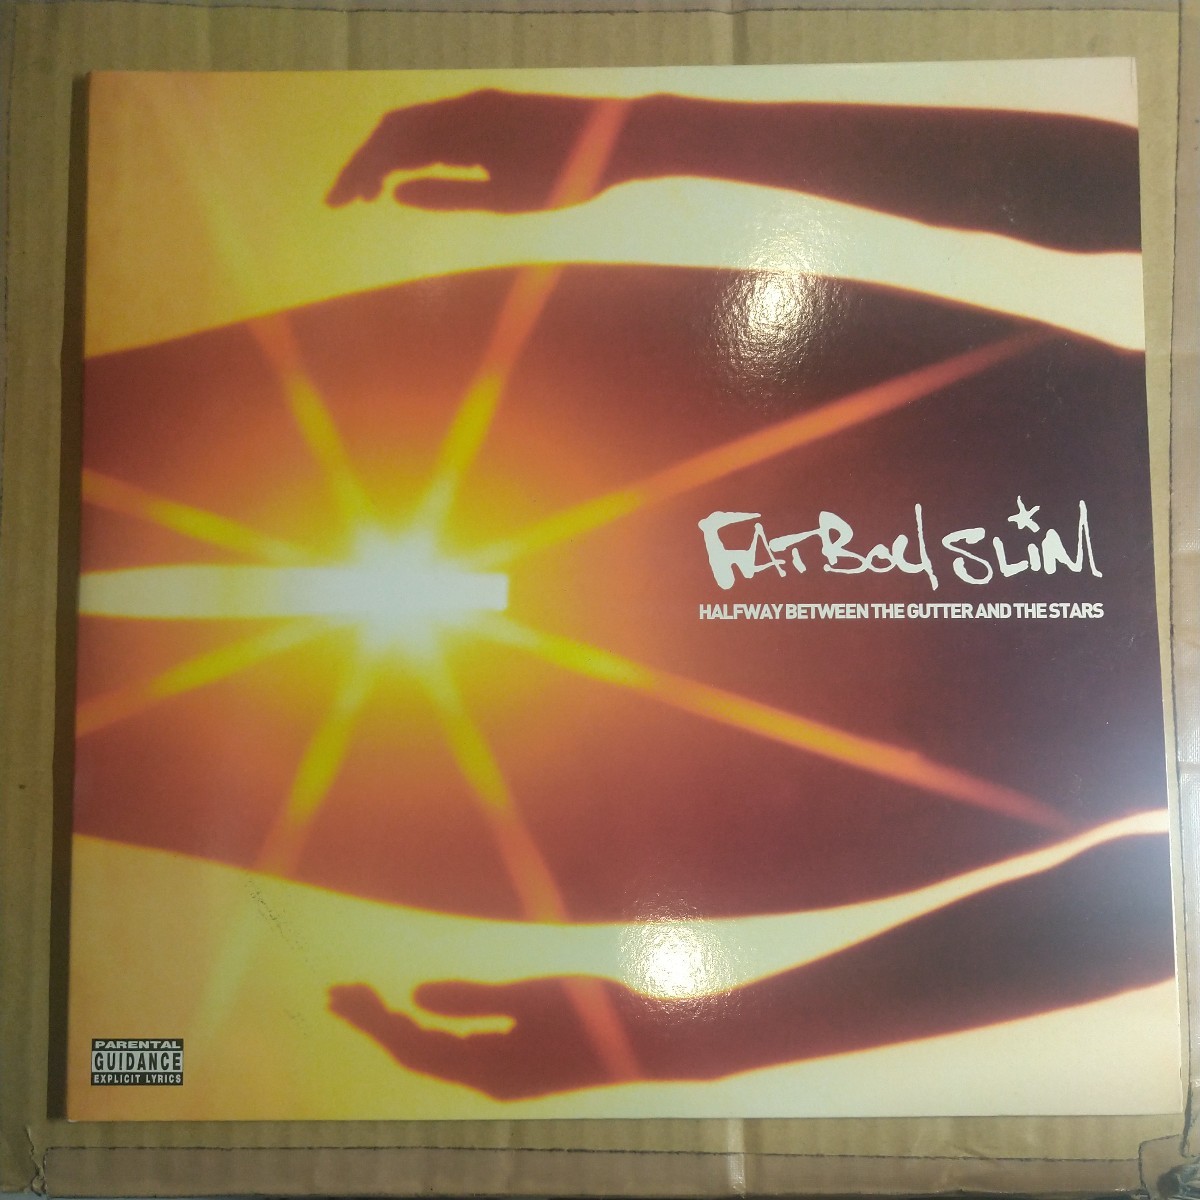 Fatboy Slim 「halfway between the gutter and the stars」米オリジナル2枚組LP 2000年 techno house electro skintファットボーイスリム